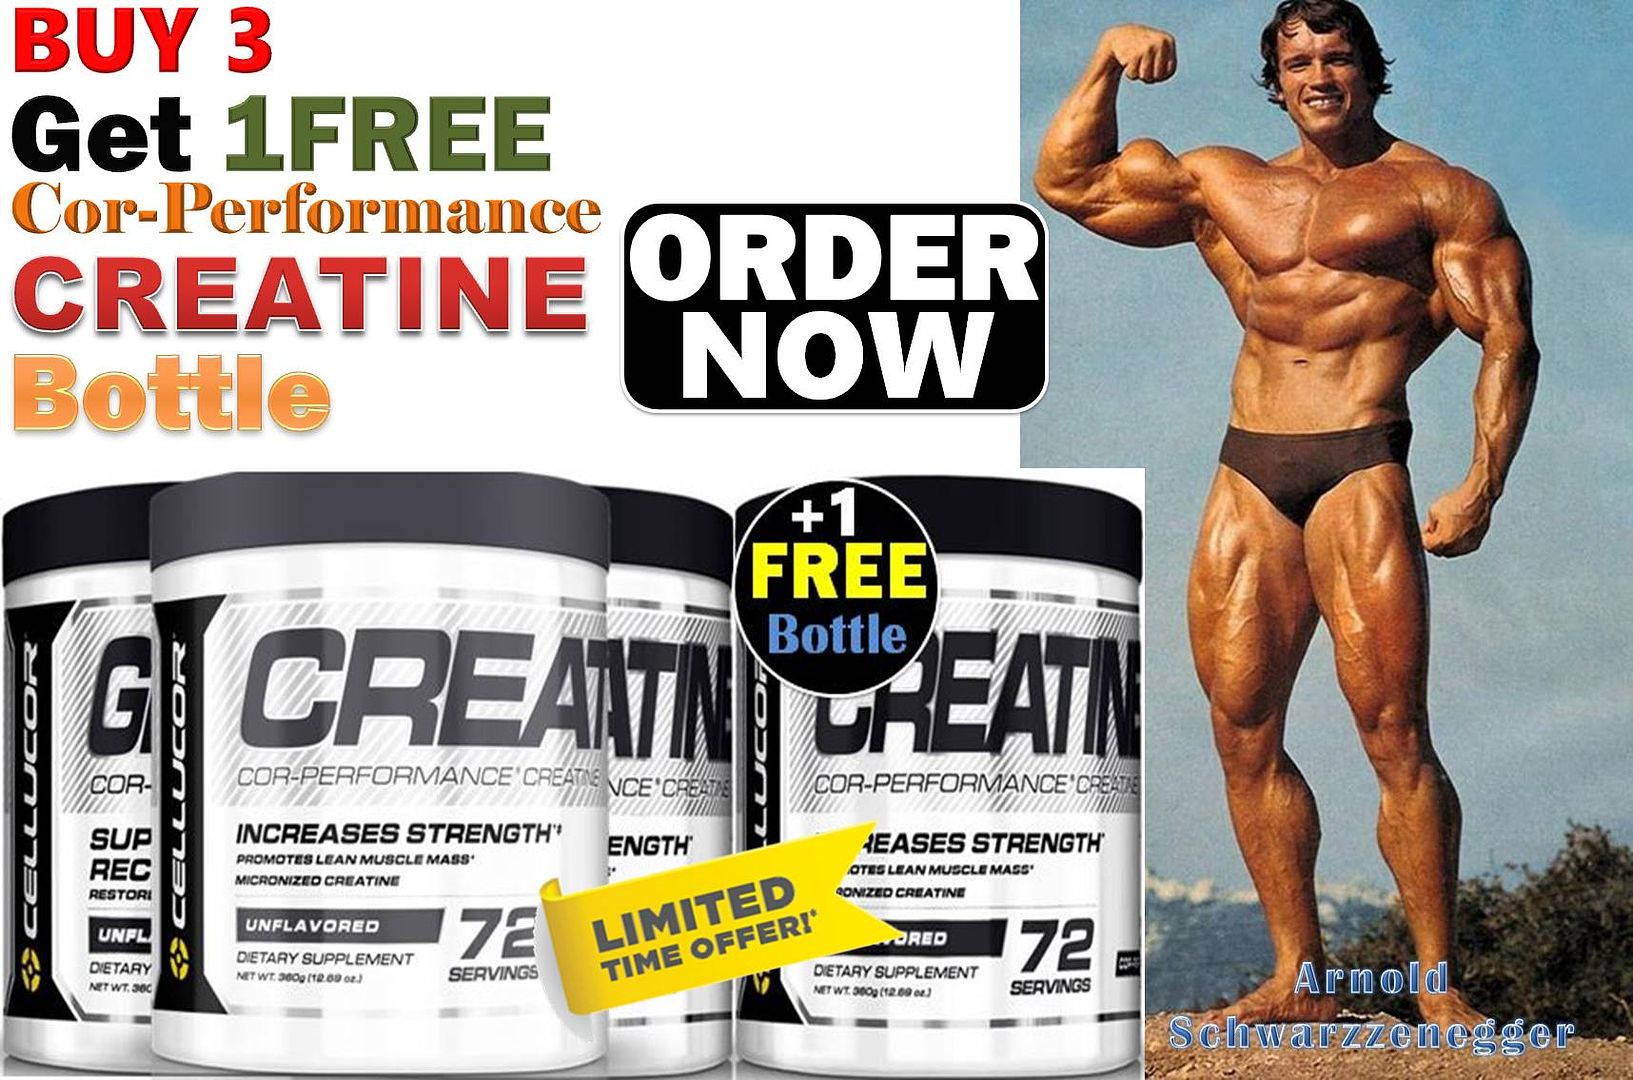 Cor-performance Creatine by Cellucor